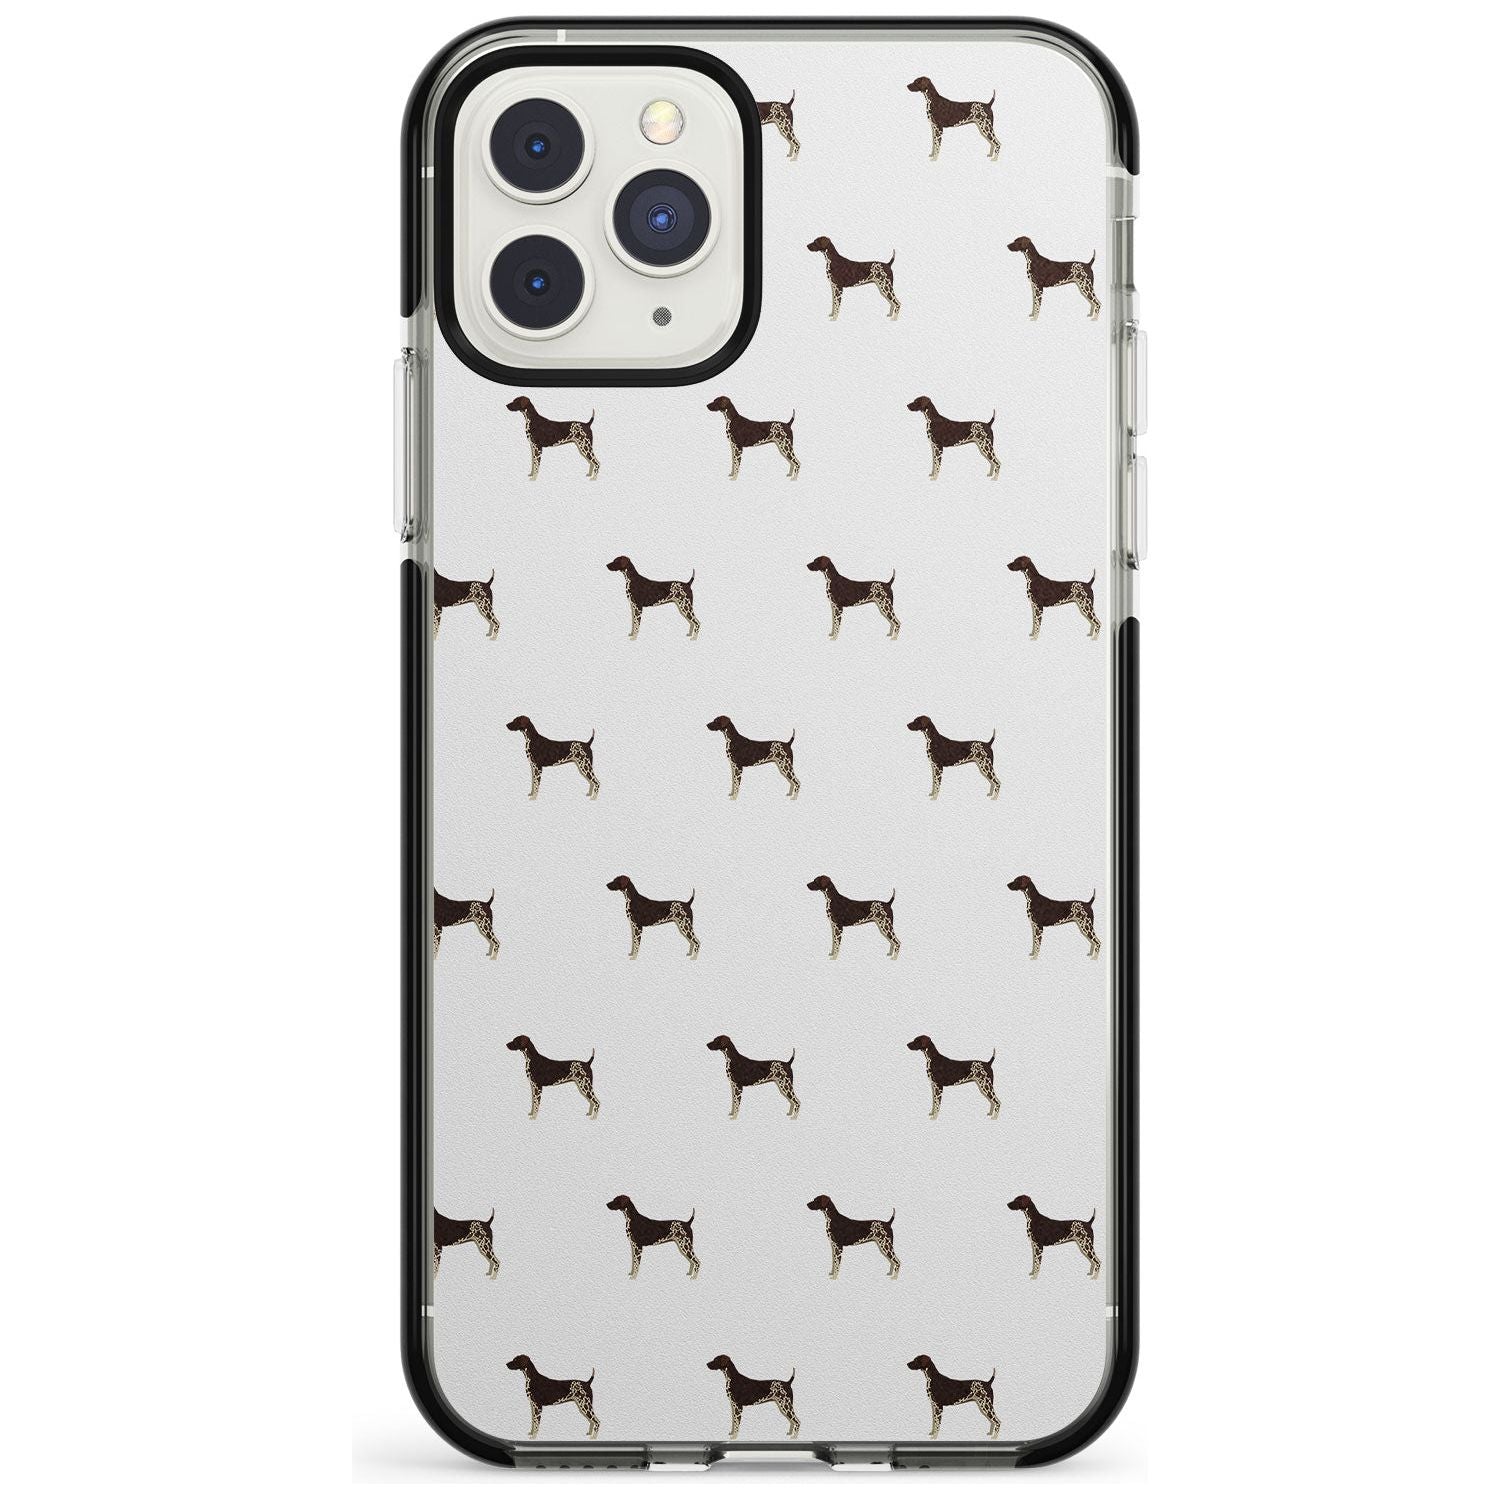 German Shorthaired Pointer Dog Pattern Black Impact Phone Case for iPhone 11 Pro Max